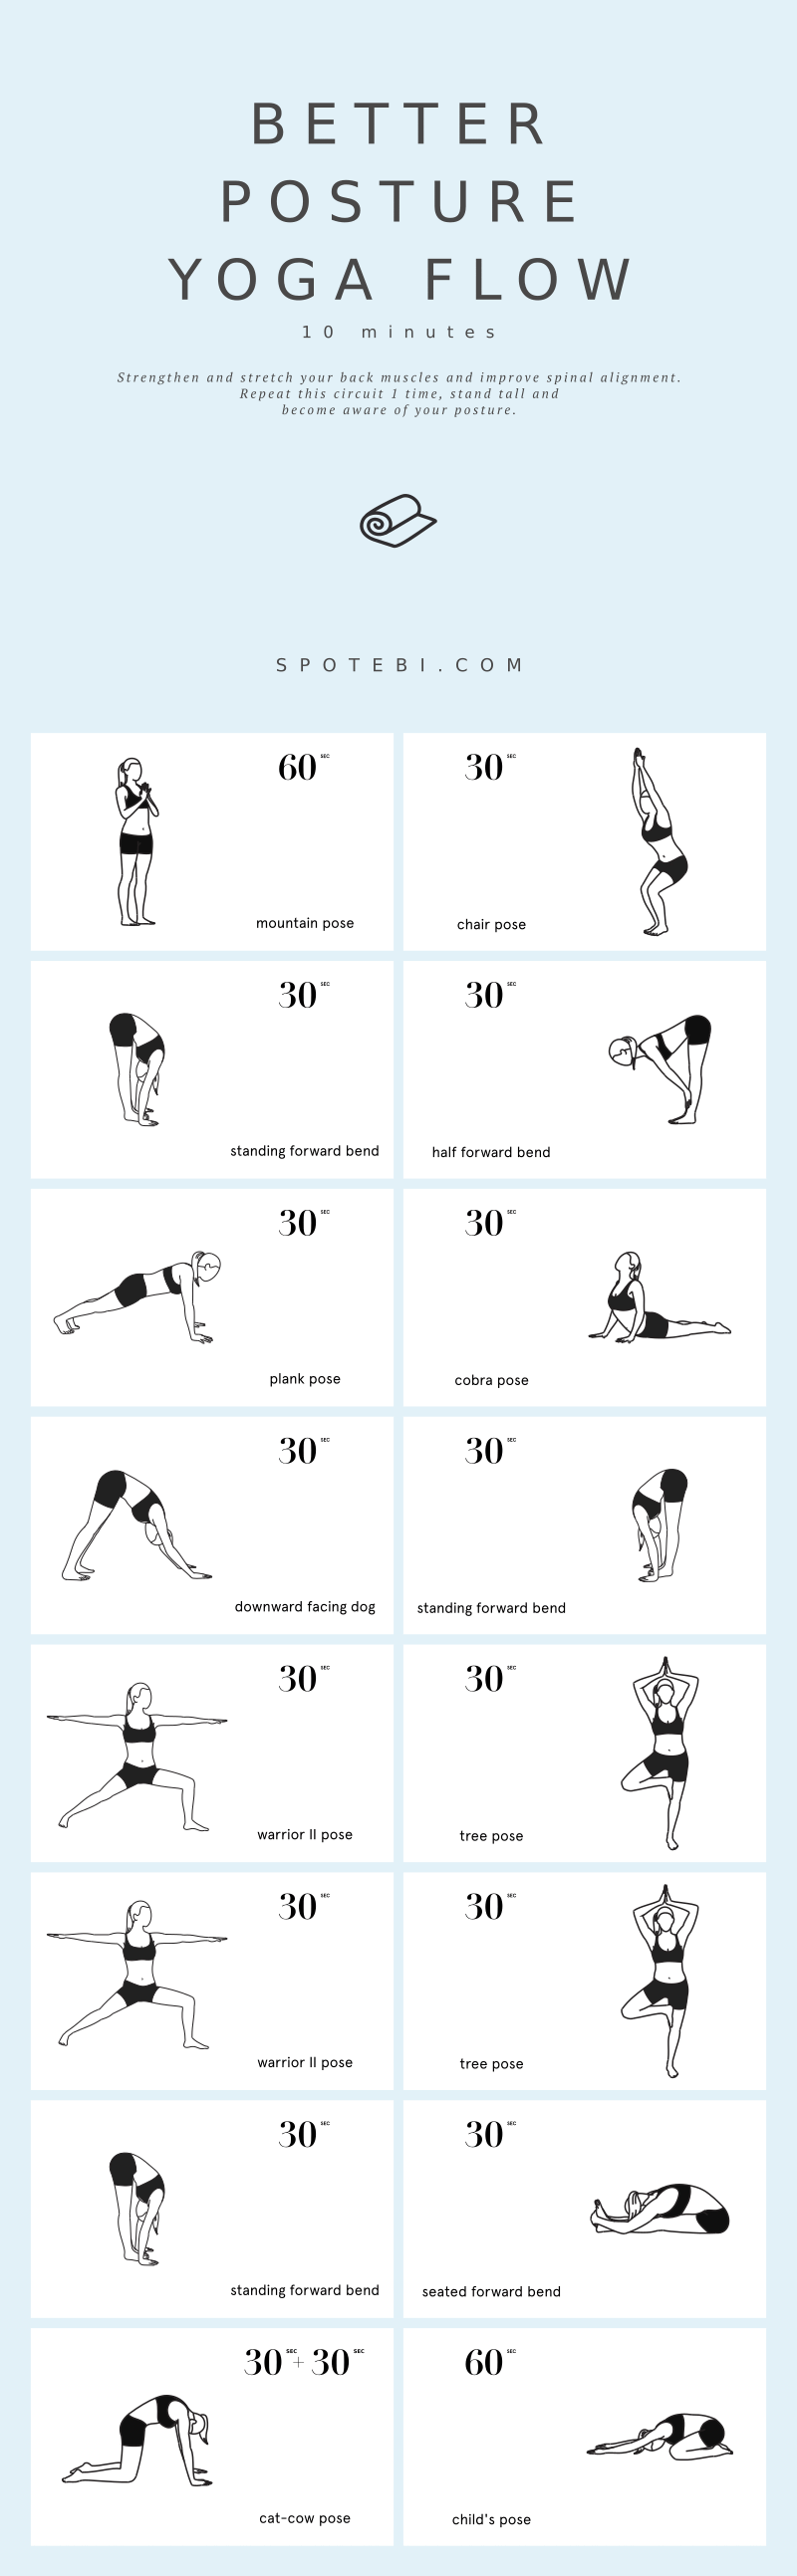 Try these yoga corrective poses to strengthen and stretch your back muscles and improve spinal alignment! This 10-minute yoga flow is designed to help you stand tall and become aware of your posture. https://www.spotebi.com/yoga-sequences/better-posture/